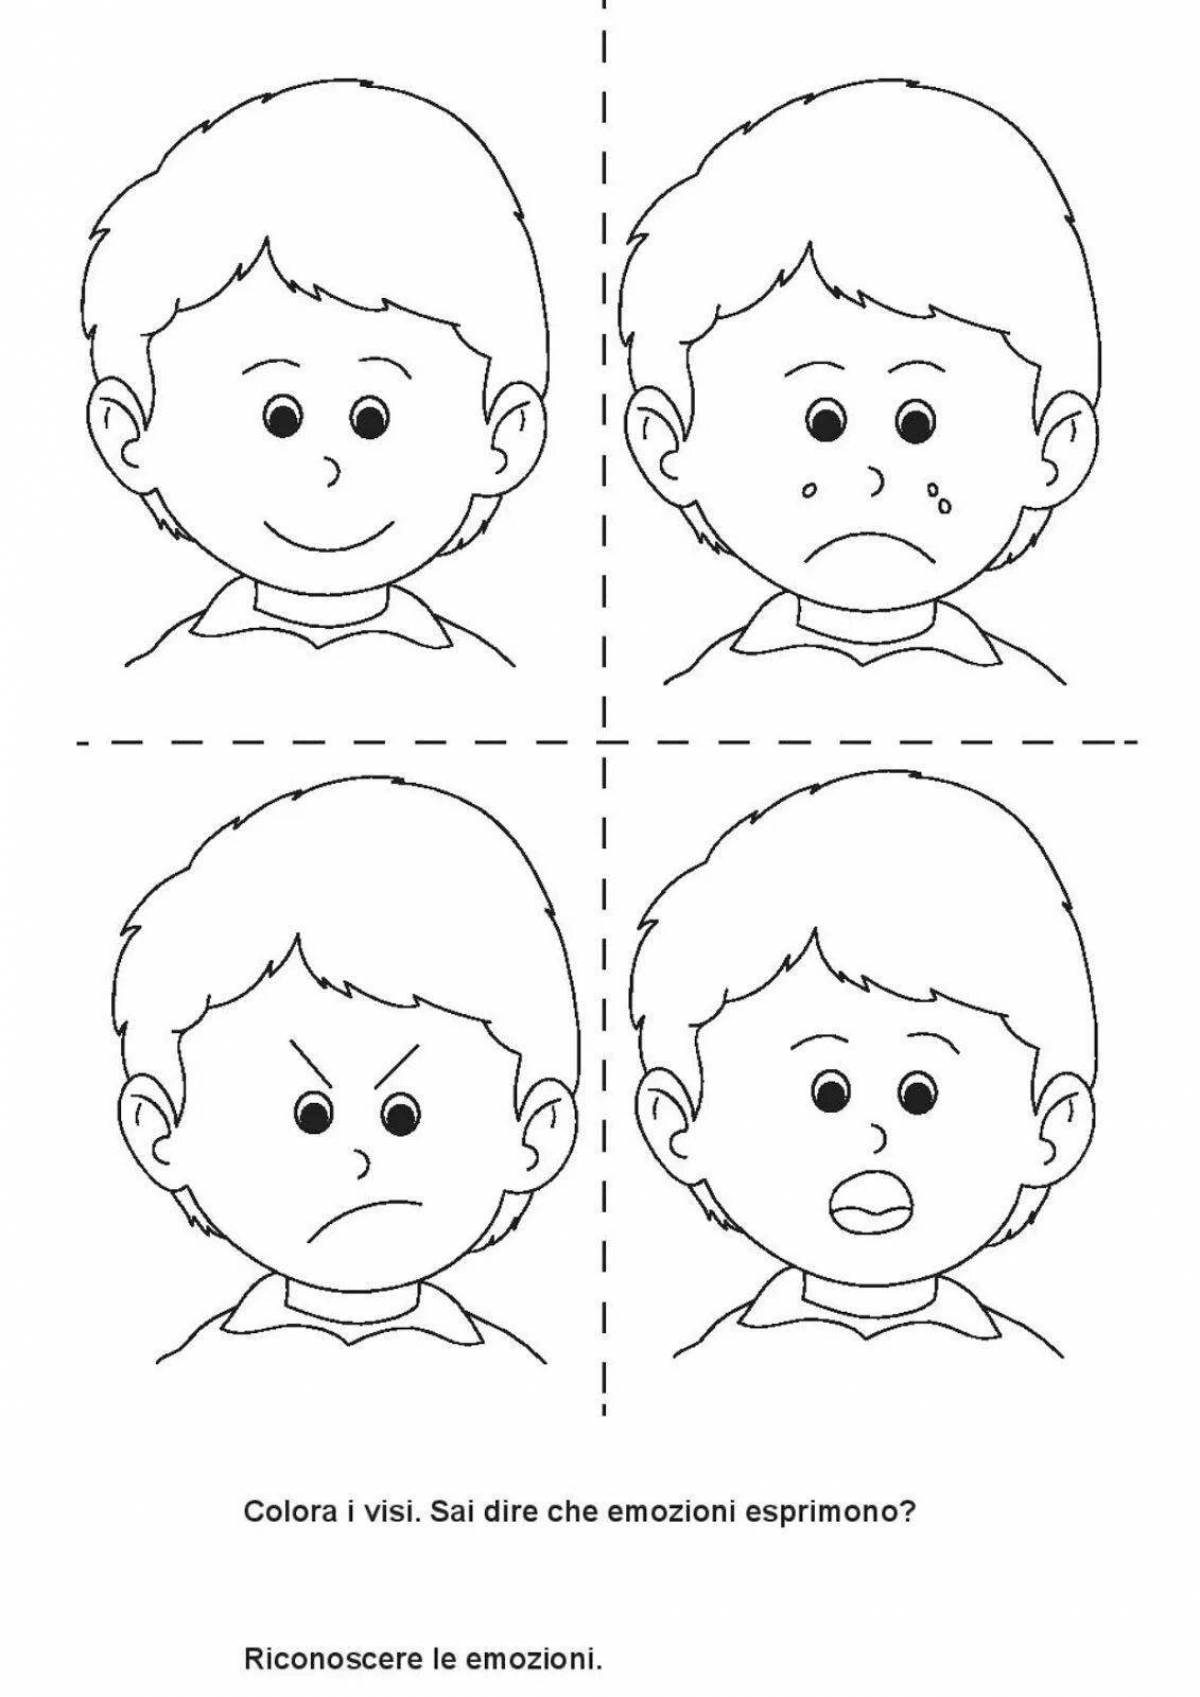 Enthusiastic emotion coloring pages for preschoolers